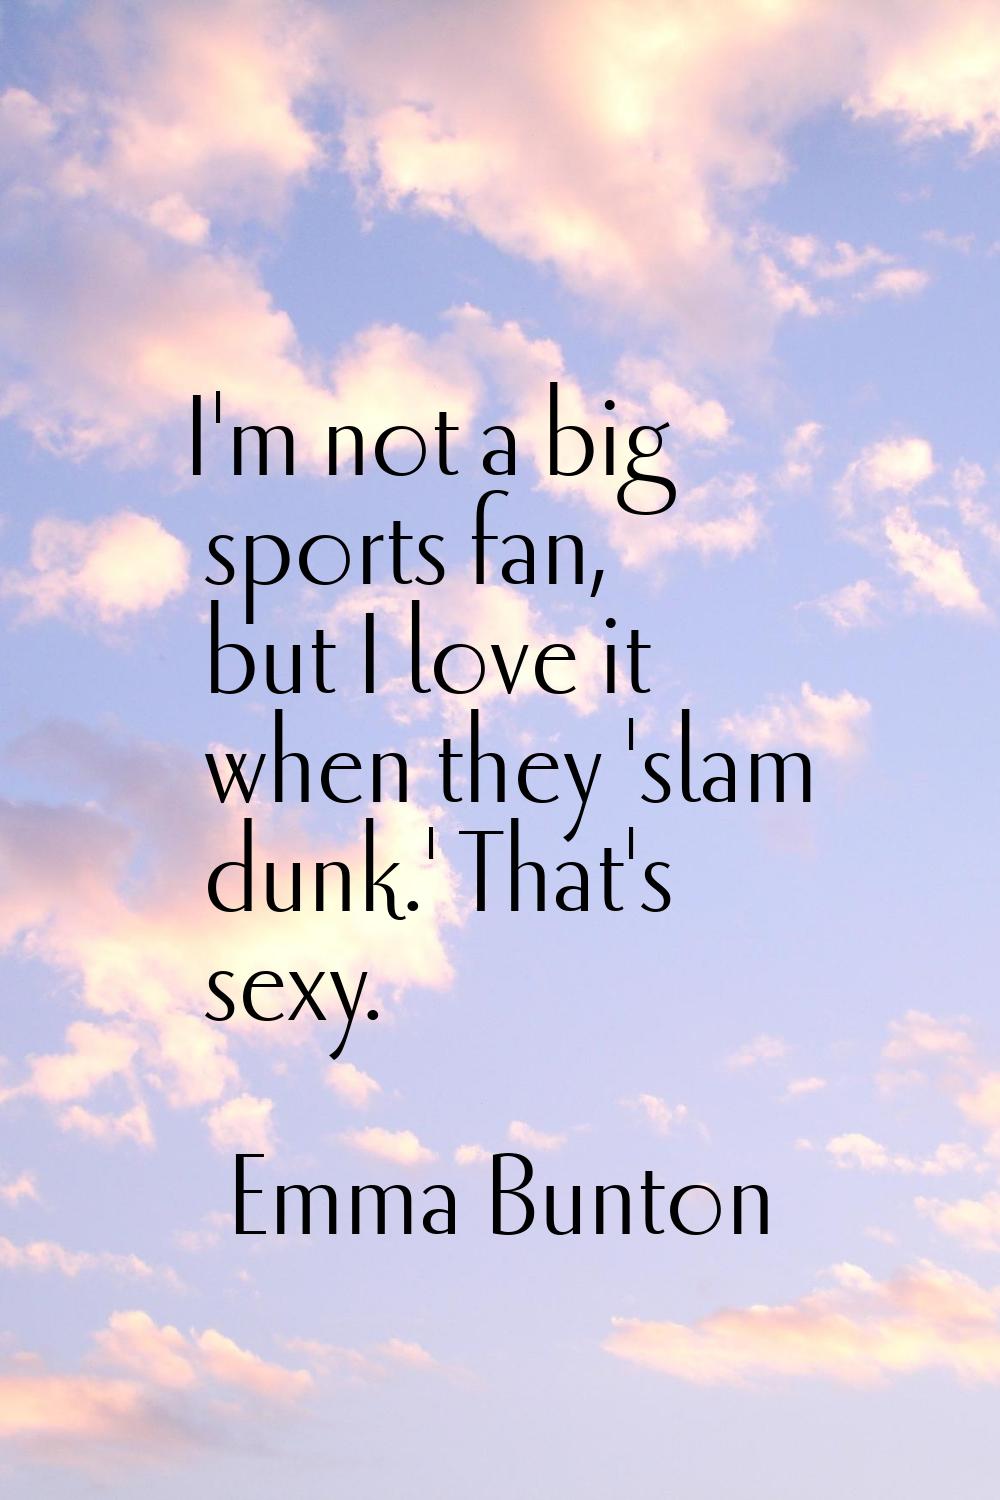 I'm not a big sports fan, but I love it when they 'slam dunk.' That's sexy.